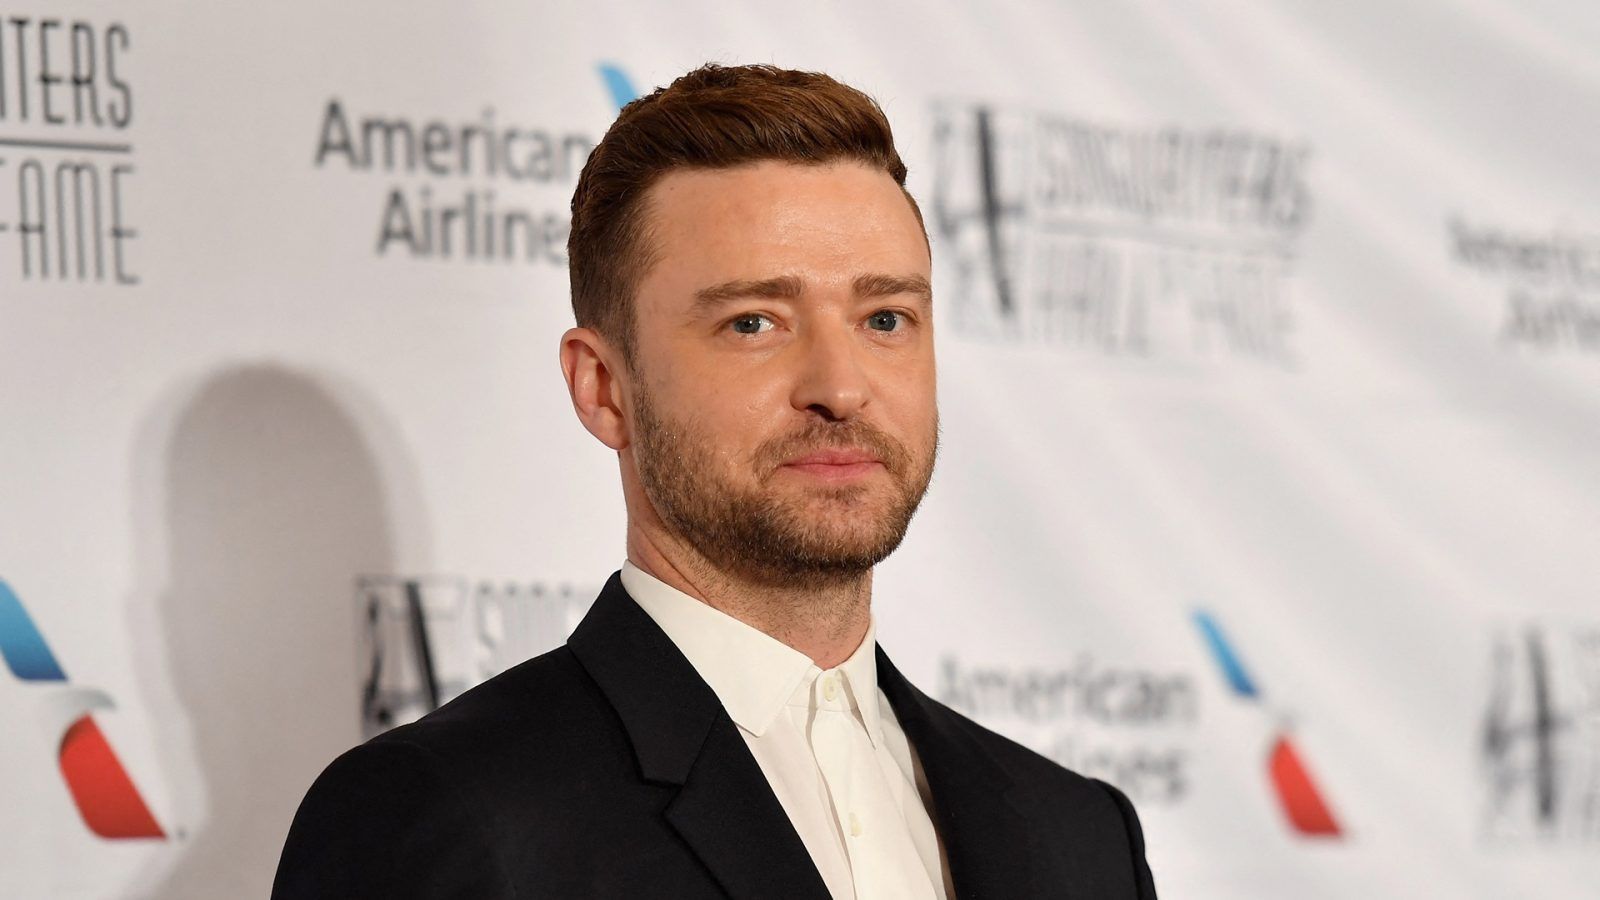 Net worth of Justin Timberlake and how he earned his fortune